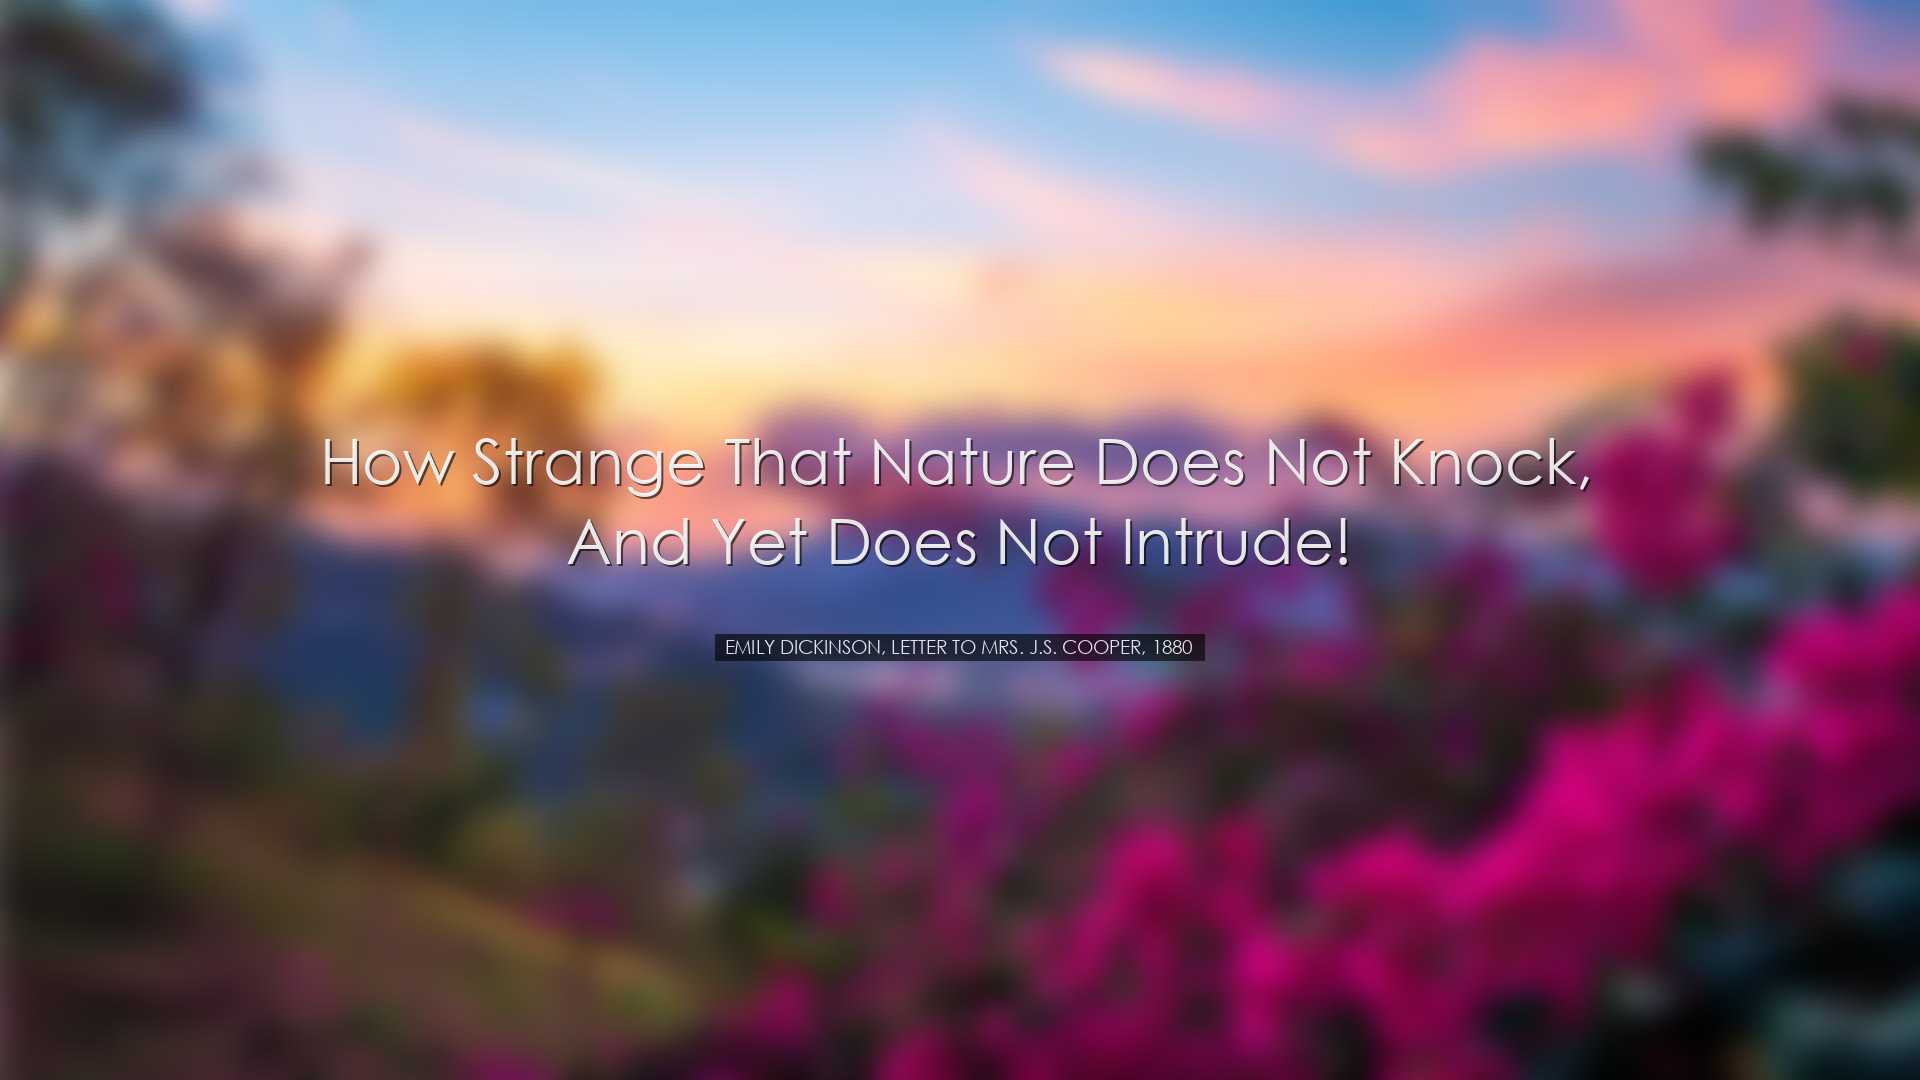 How strange that Nature does not knock, and yet does not intrude!